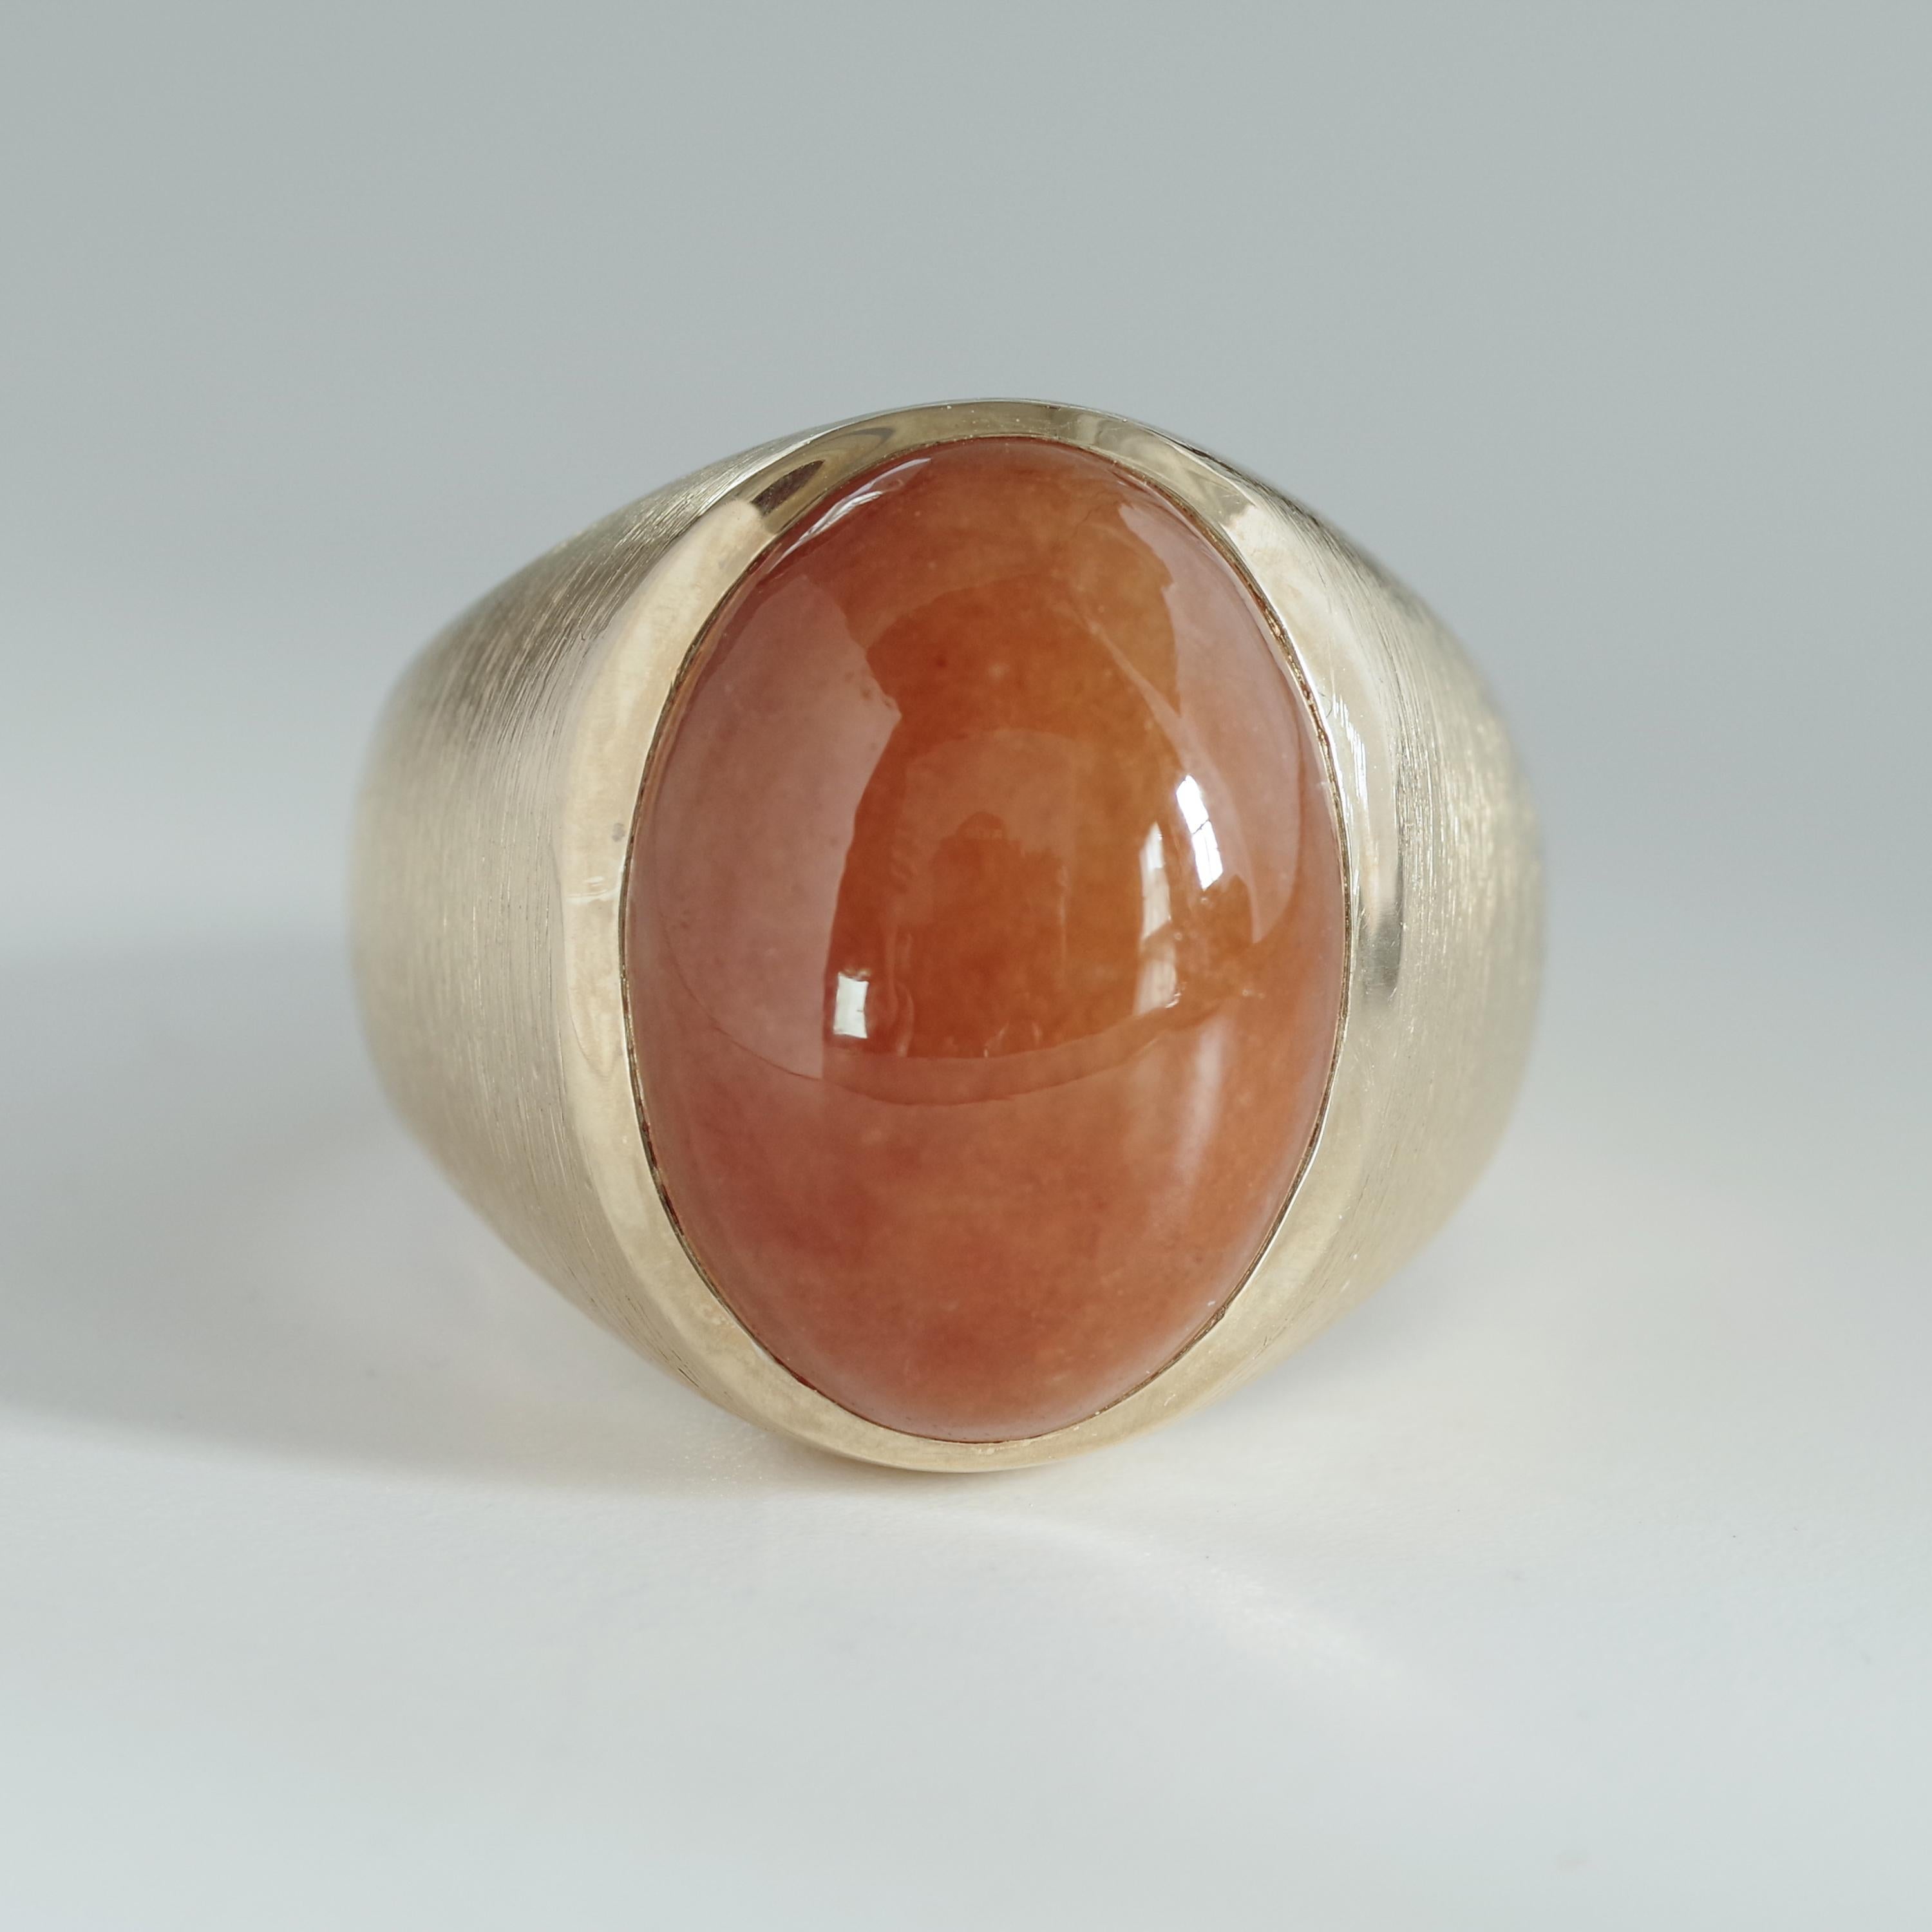 Red jade. It's rare, so you don't come across it often and it's frequently been dyed when you do. I was very excited when I found this 14k yellow gold men's ring from the 1960s featuring a large, saturated and impressive red jade cabochon, certified